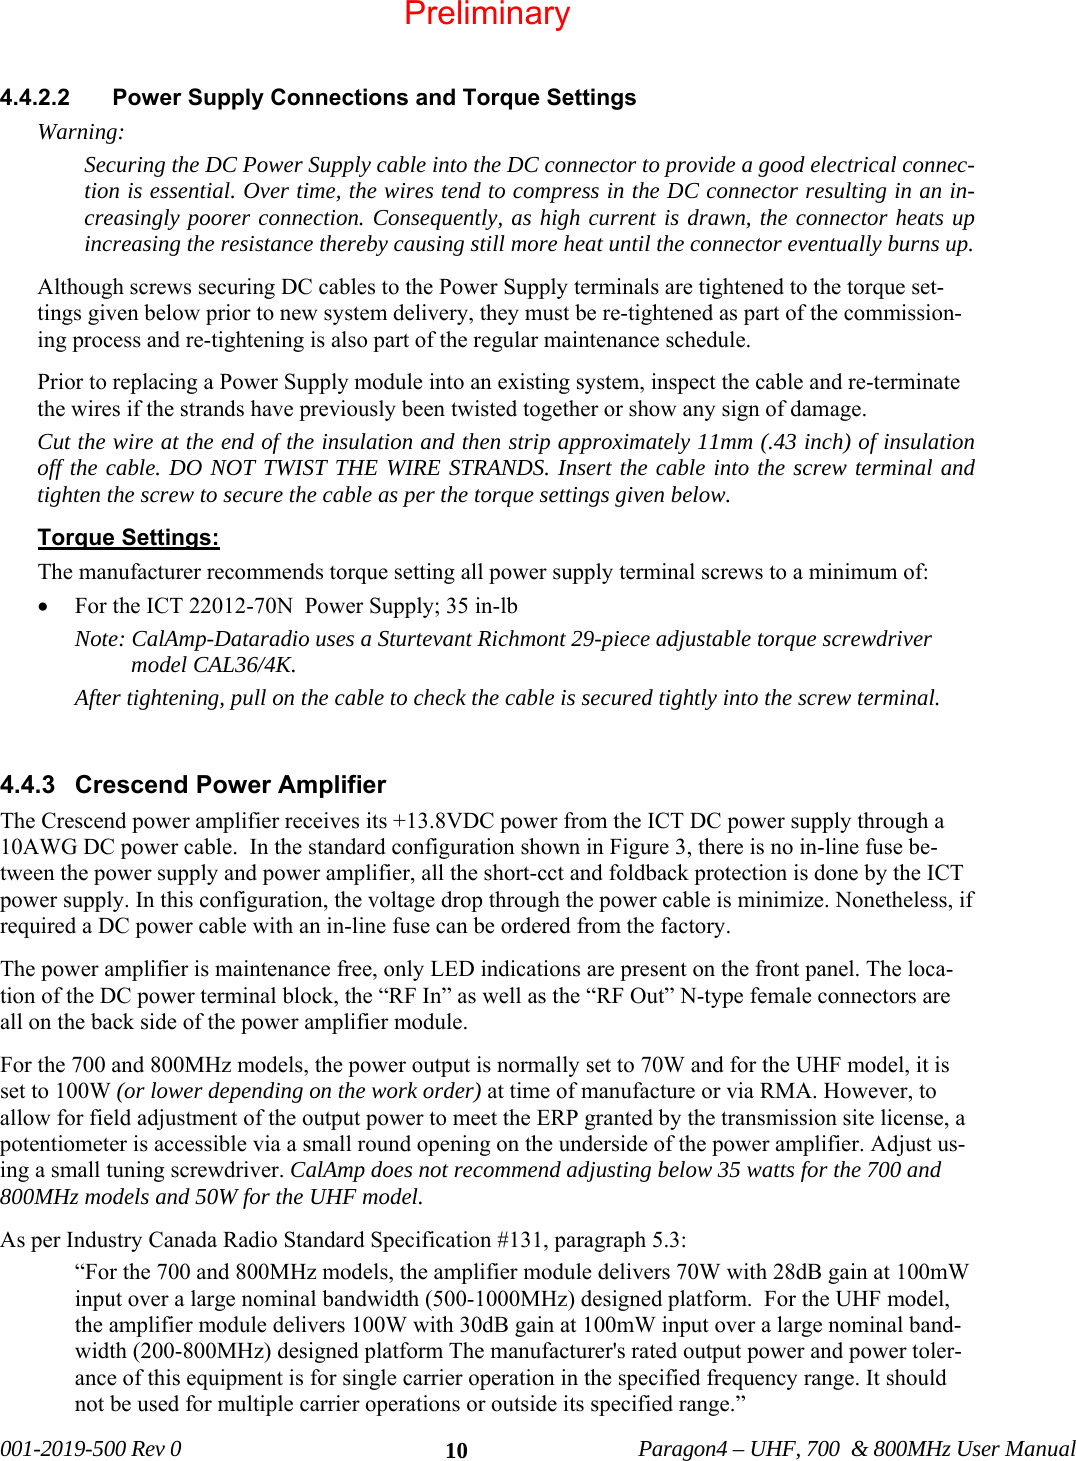   001-2019-500 Rev 0          Paragon4 – UHF, 700  &amp; 800MHz User Manual   10 4.4.2.2  Power Supply Connections and Torque Settings  Warning: Securing the DC Power Supply cable into the DC connector to provide a good electrical connec-tion is essential. Over time, the wires tend to compress in the DC connector resulting in an in-creasingly poorer connection. Consequently, as high current is drawn, the connector heats up increasing the resistance thereby causing still more heat until the connector eventually burns up.  Although screws securing DC cables to the Power Supply terminals are tightened to the torque set-tings given below prior to new system delivery, they must be re-tightened as part of the commission-ing process and re-tightening is also part of the regular maintenance schedule. Prior to replacing a Power Supply module into an existing system, inspect the cable and re-terminate the wires if the strands have previously been twisted together or show any sign of damage. Cut the wire at the end of the insulation and then strip approximately 11mm (.43 inch) of insulation off the cable. DO NOT TWIST THE WIRE STRANDS. Insert the cable into the screw terminal and tighten the screw to secure the cable as per the torque settings given below. Torque Settings: The manufacturer recommends torque setting all power supply terminal screws to a minimum of: • For the ICT 22012-70N  Power Supply; 35 in-lb Note: CalAmp-Dataradio uses a Sturtevant Richmont 29-piece adjustable torque screwdriver model CAL36/4K. After tightening, pull on the cable to check the cable is secured tightly into the screw terminal.  4.4.3 Crescend Power Amplifier The Crescend power amplifier receives its +13.8VDC power from the ICT DC power supply through a 10AWG DC power cable.  In the standard configuration shown in Figure 3, there is no in-line fuse be-tween the power supply and power amplifier, all the short-cct and foldback protection is done by the ICT power supply. In this configuration, the voltage drop through the power cable is minimize. Nonetheless, if required a DC power cable with an in-line fuse can be ordered from the factory. The power amplifier is maintenance free, only LED indications are present on the front panel. The loca-tion of the DC power terminal block, the “RF In” as well as the “RF Out” N-type female connectors are all on the back side of the power amplifier module. For the 700 and 800MHz models, the power output is normally set to 70W and for the UHF model, it is set to 100W (or lower depending on the work order) at time of manufacture or via RMA. However, to allow for field adjustment of the output power to meet the ERP granted by the transmission site license, a potentiometer is accessible via a small round opening on the underside of the power amplifier. Adjust us-ing a small tuning screwdriver. CalAmp does not recommend adjusting below 35 watts for the 700 and 800MHz models and 50W for the UHF model.  As per Industry Canada Radio Standard Specification #131, paragraph 5.3: “For the 700 and 800MHz models, the amplifier module delivers 70W with 28dB gain at 100mW input over a large nominal bandwidth (500-1000MHz) designed platform.  For the UHF model,  the amplifier module delivers 100W with 30dB gain at 100mW input over a large nominal band-width (200-800MHz) designed platform The manufacturer&apos;s rated output power and power toler-ance of this equipment is for single carrier operation in the specified frequency range. It should not be used for multiple carrier operations or outside its specified range.” Preliminary